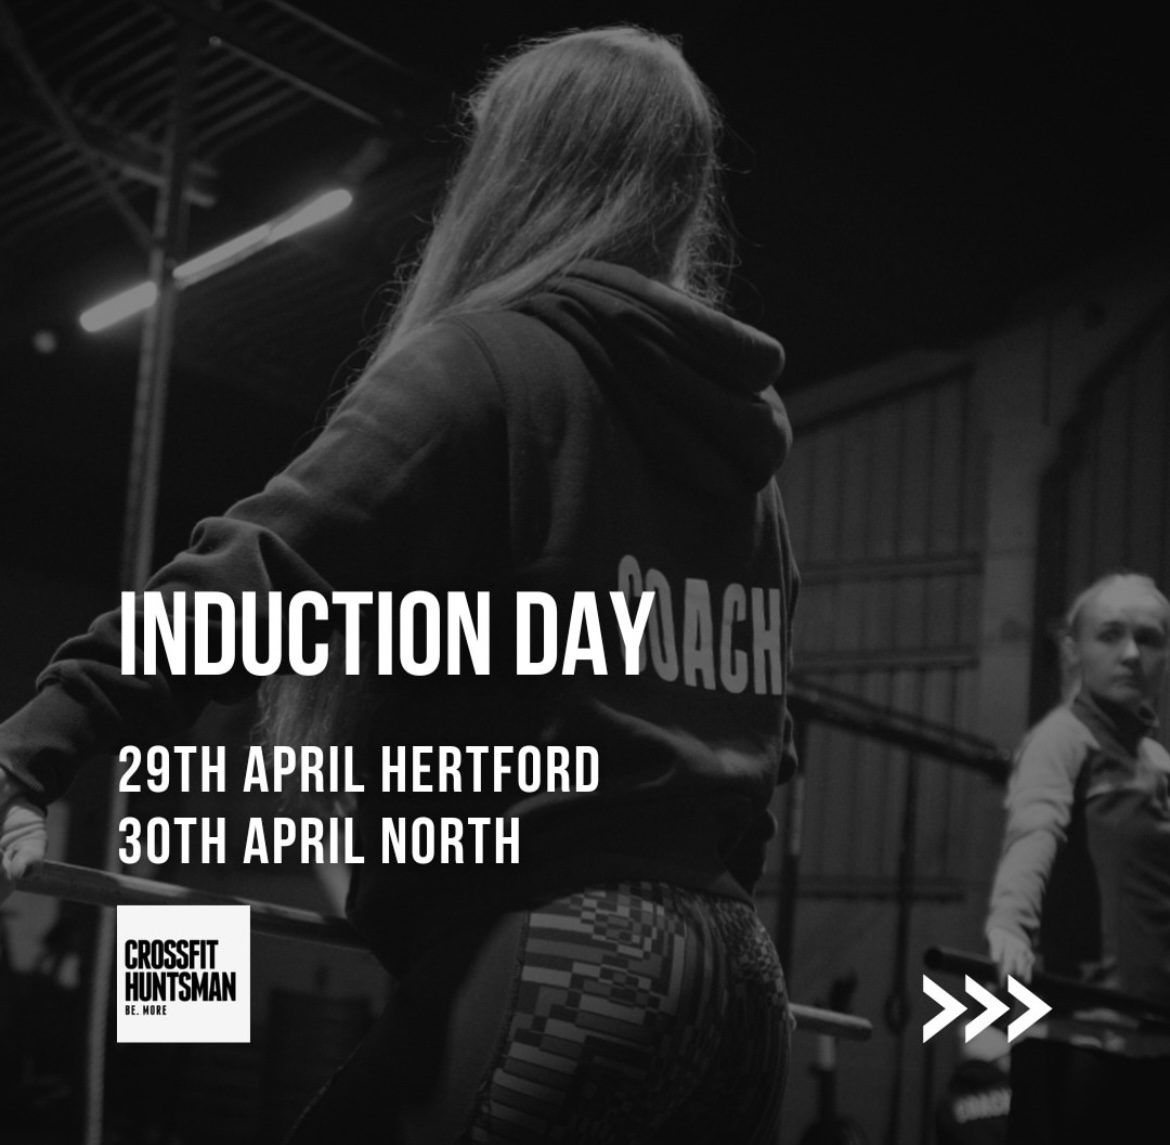 NEW INDUCTION DAY AT BOTH LOCATIONS...